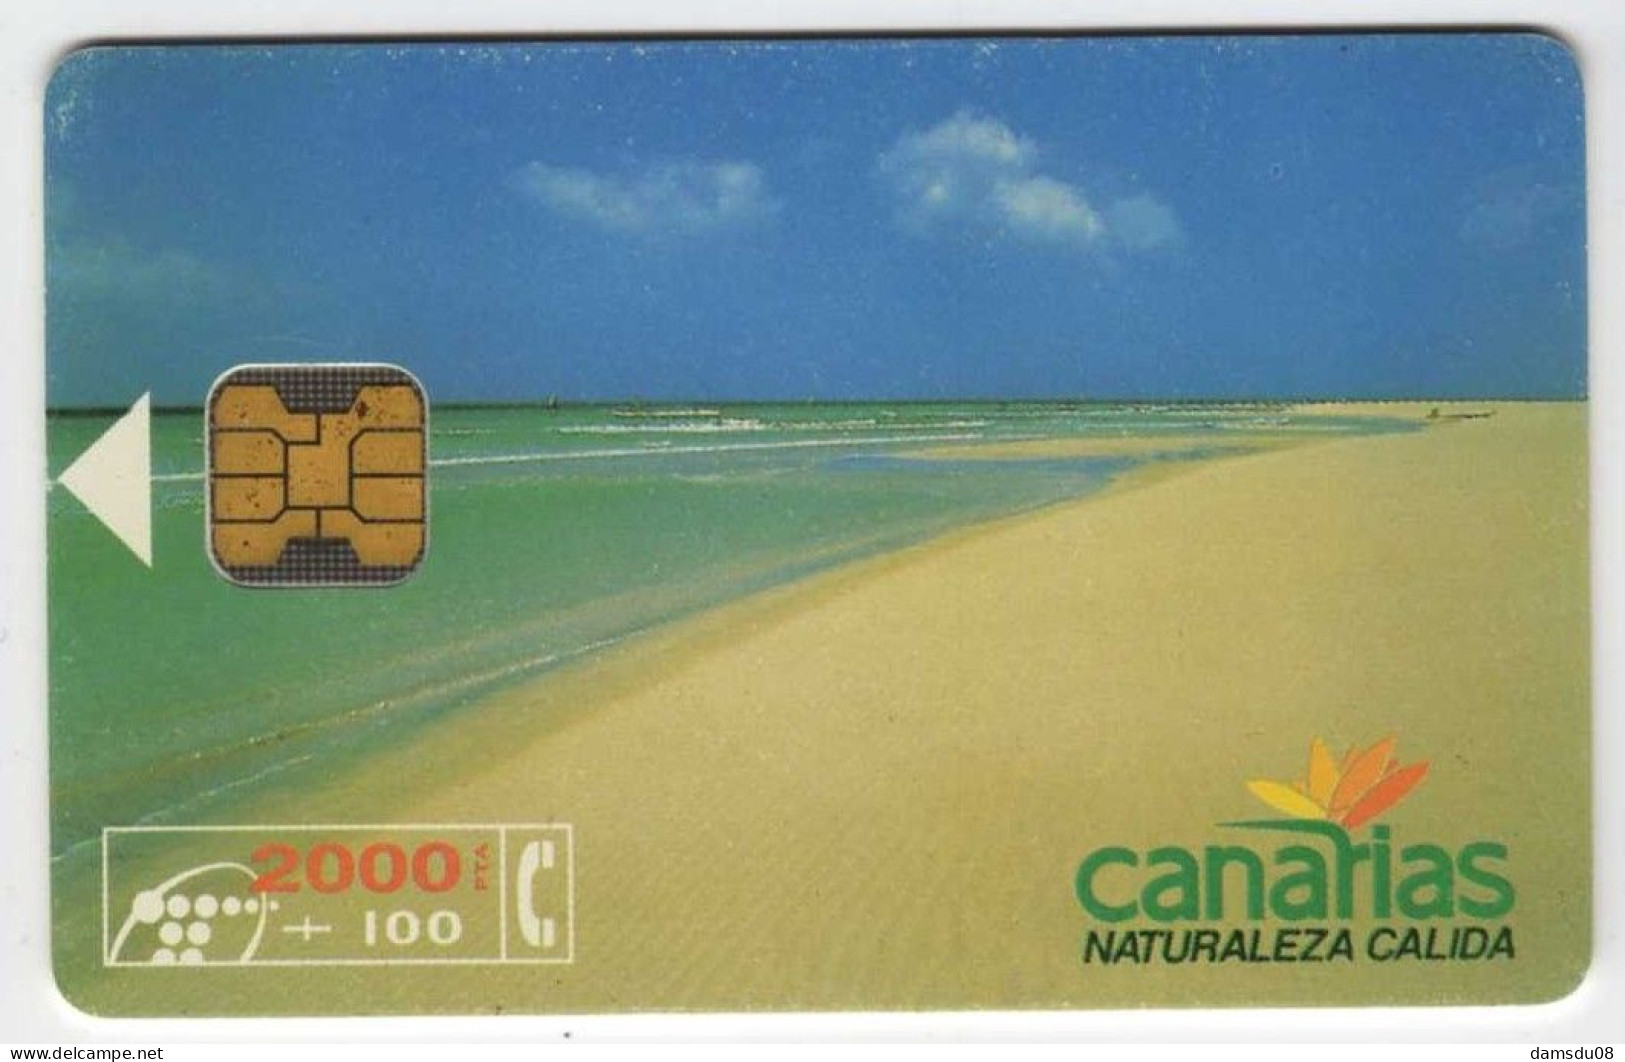 Espagne Canarias 2000 PTA 08/94 150000 Exemplaires Vide - Basic Issues